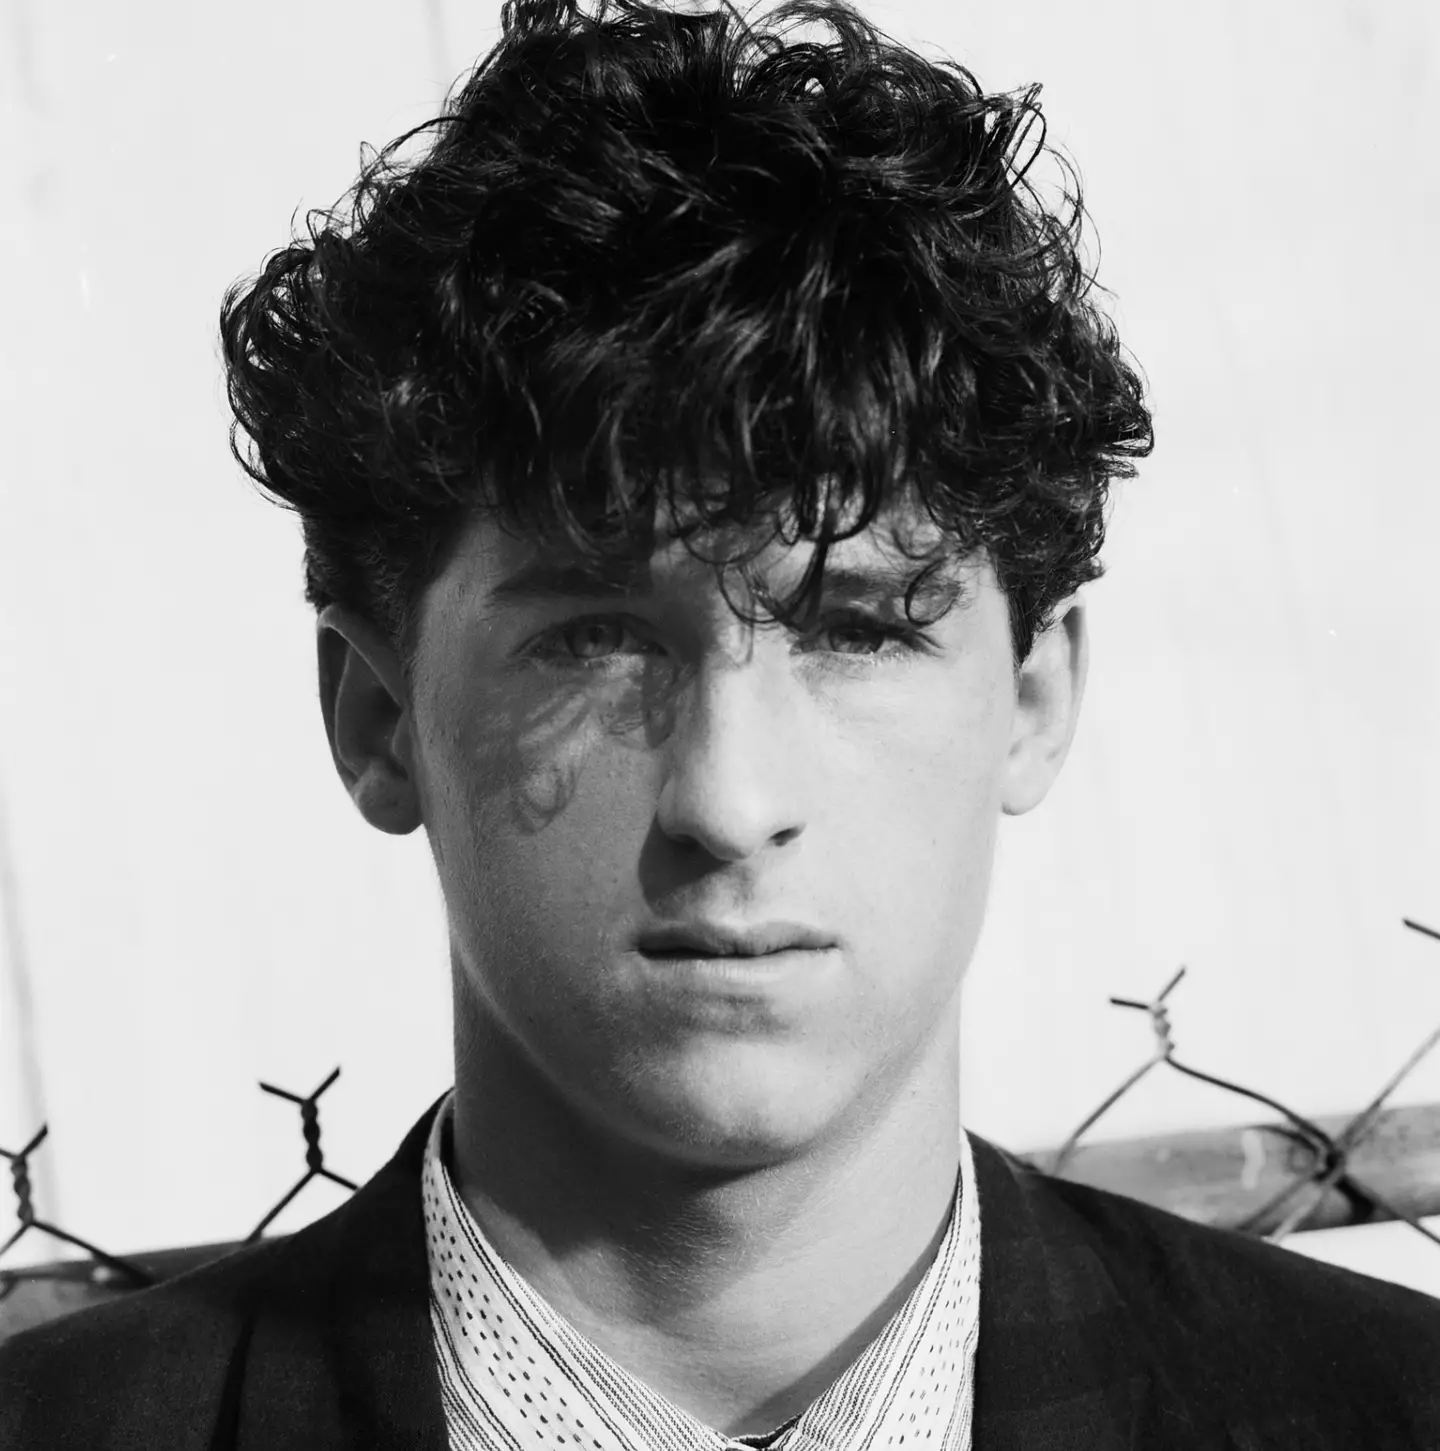 Patrick Dempsey in 1985.